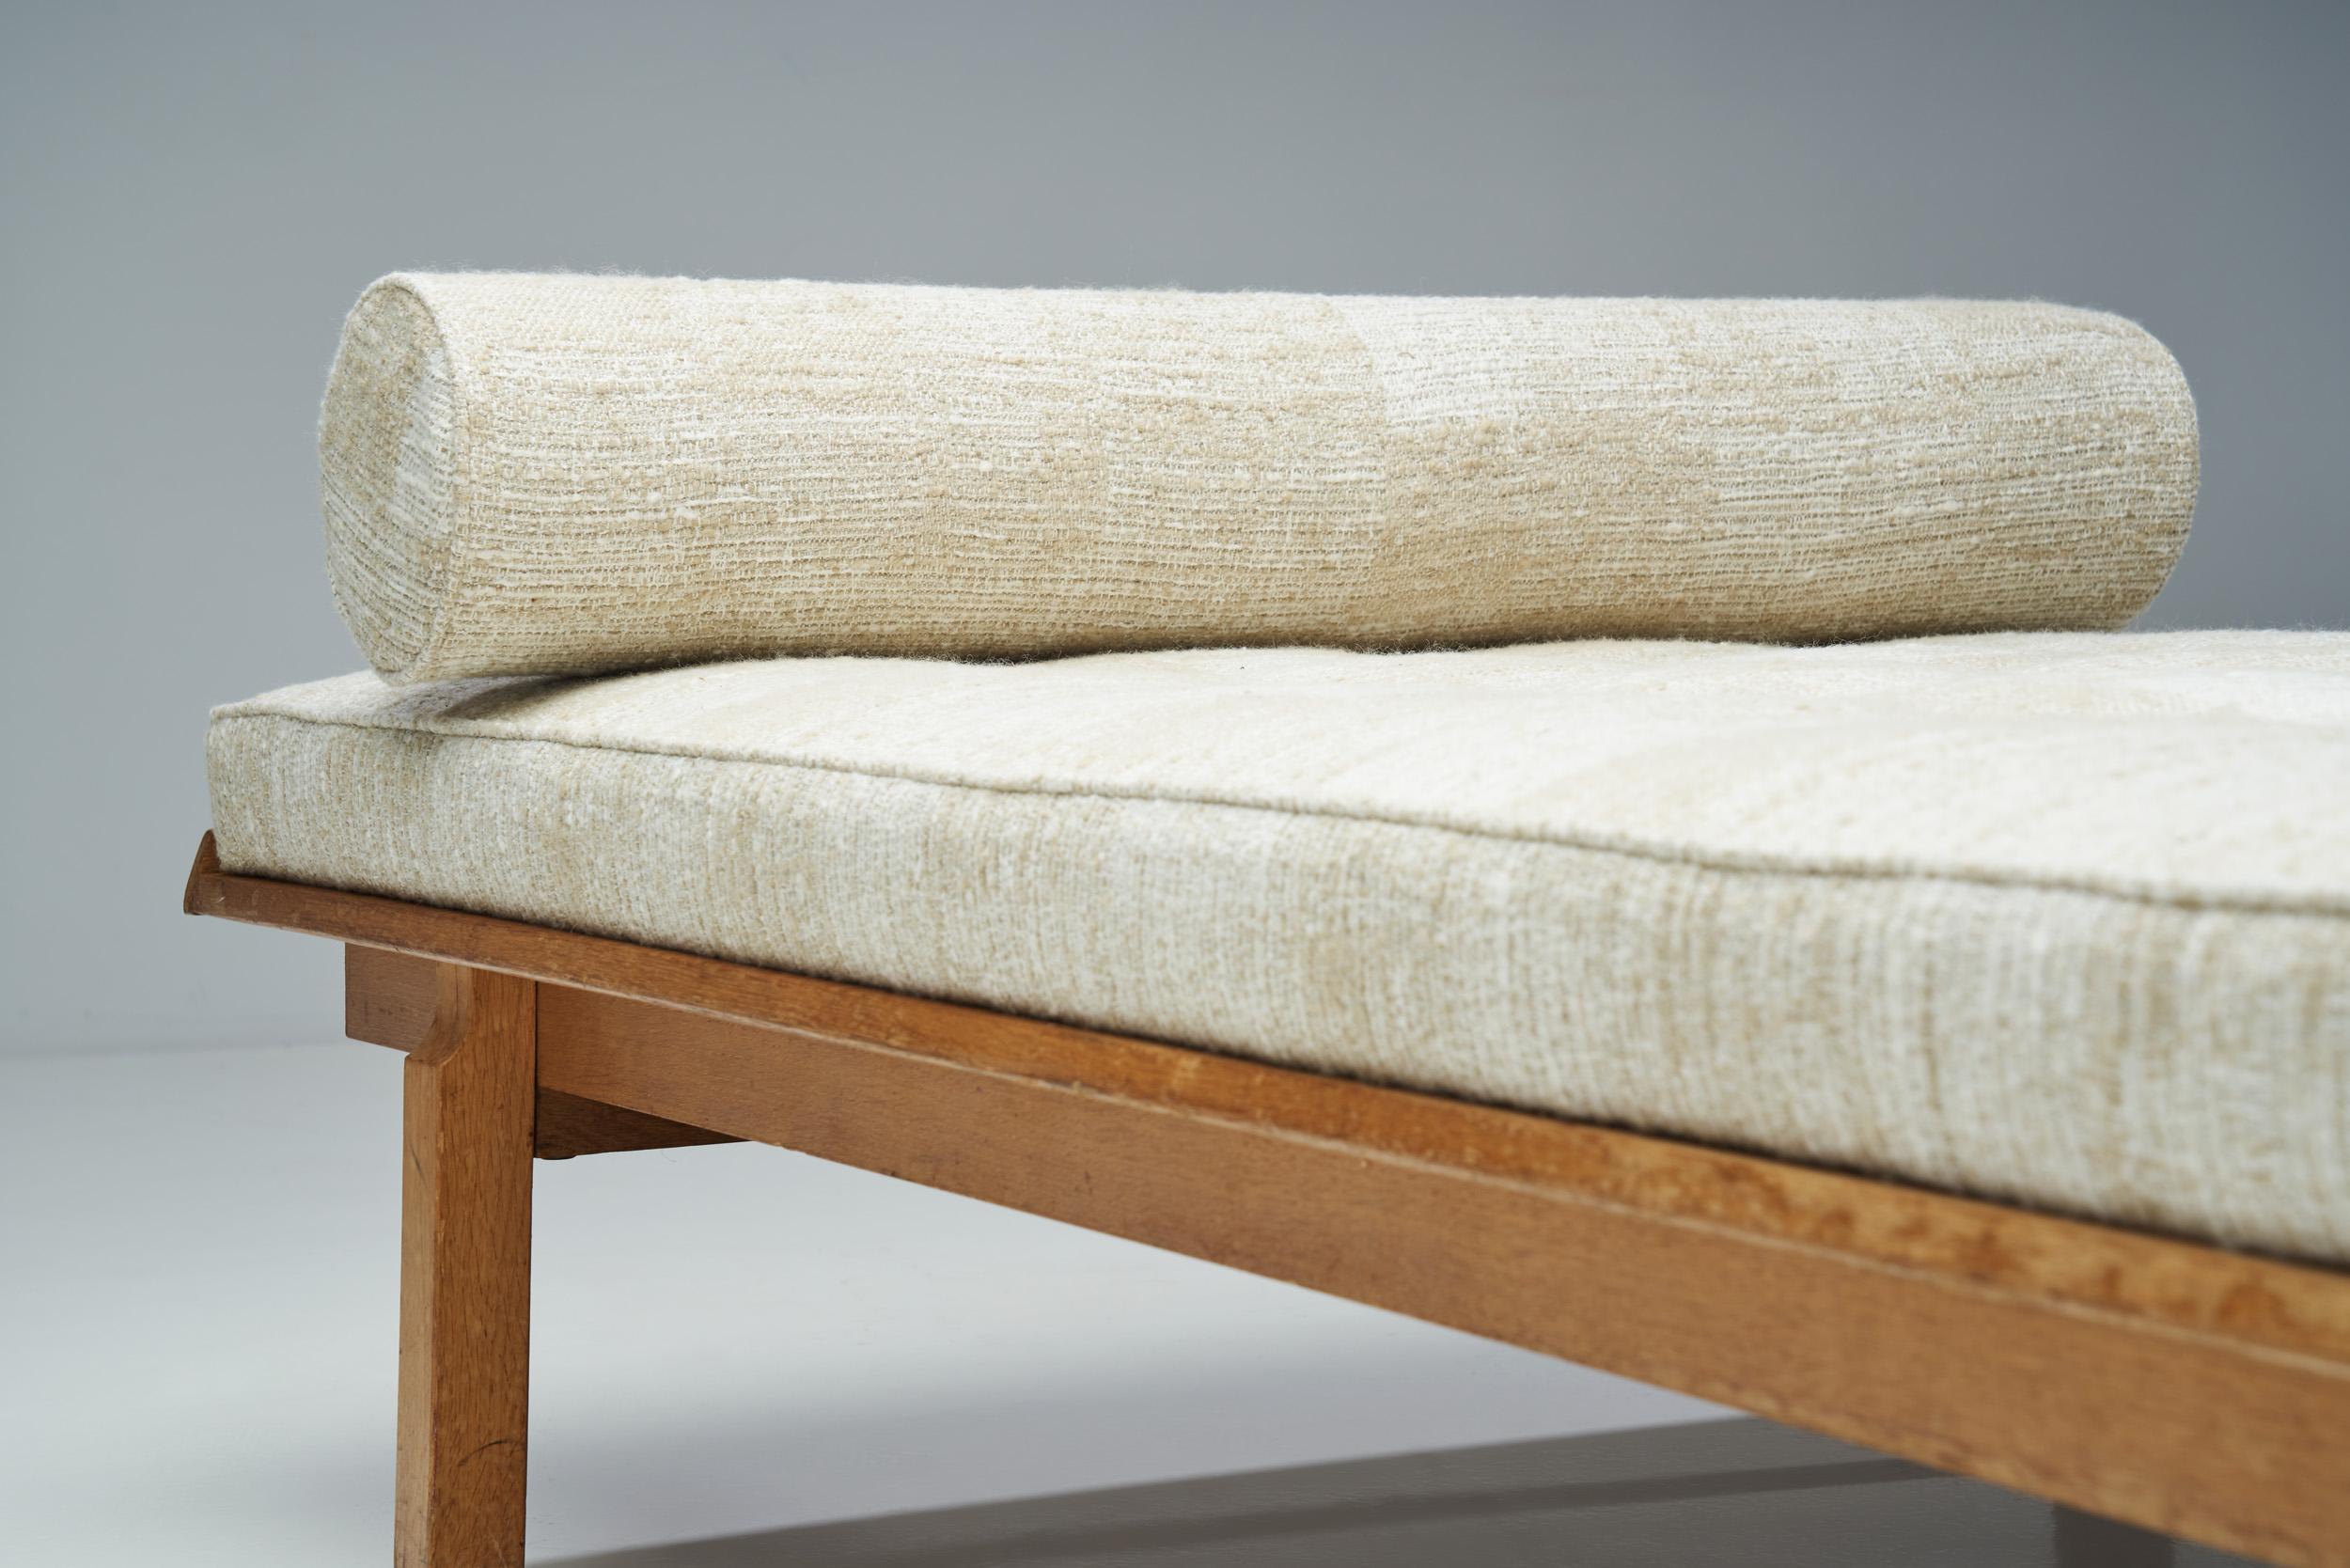 Danish Oak Daybed with Upholstered Mattress and Pillow, Denmark, ca 1950s For Sale 7